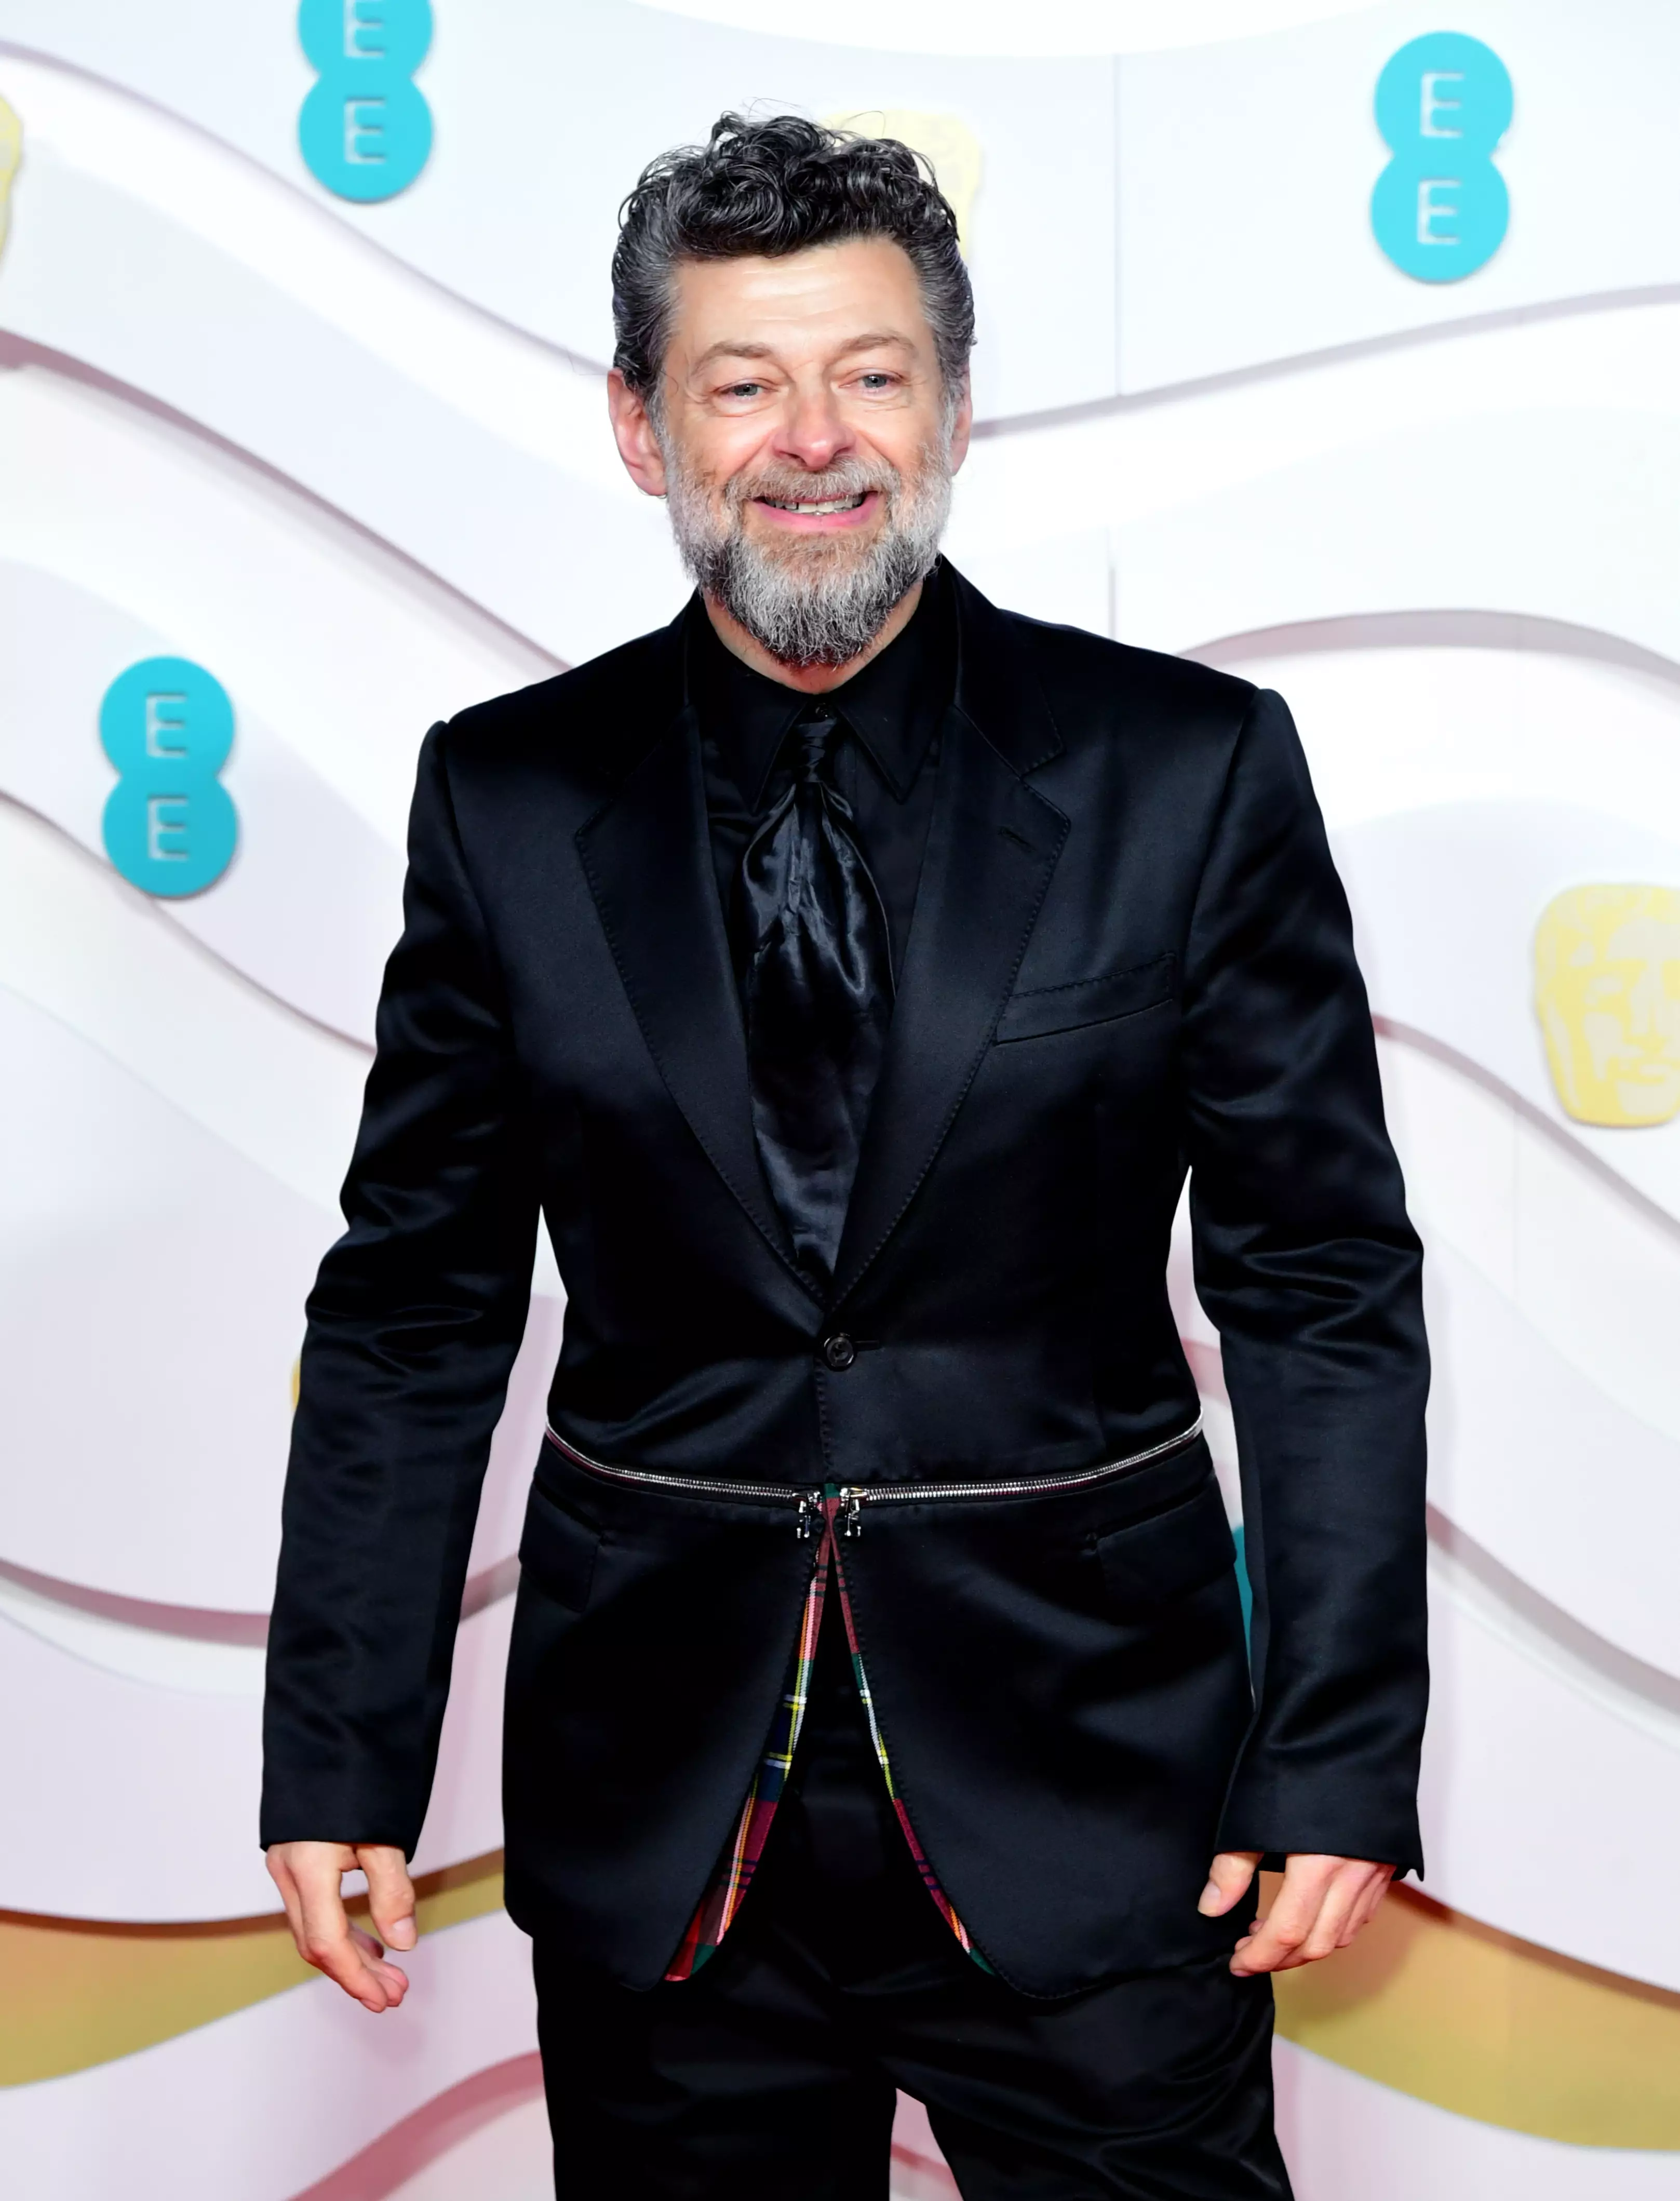 Andy Serkis will be reading The Hobbit for fans to help raise money for charity.